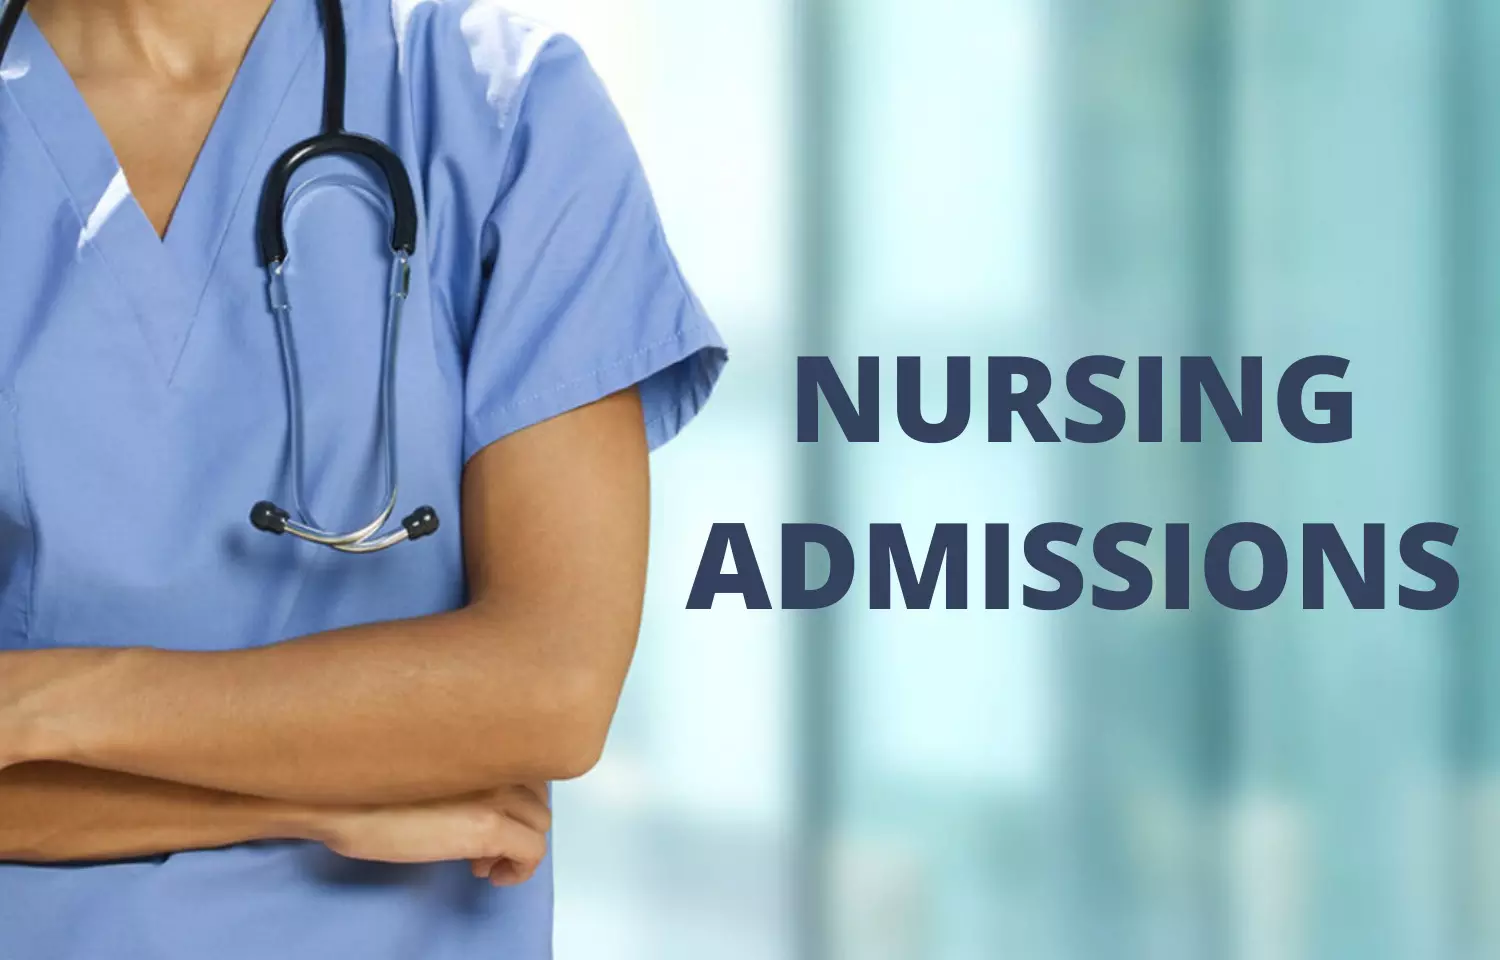 DME Andhra Pradesh Extends deadline for Admissions into General Nursing Midwifery Training Course Courses 2021